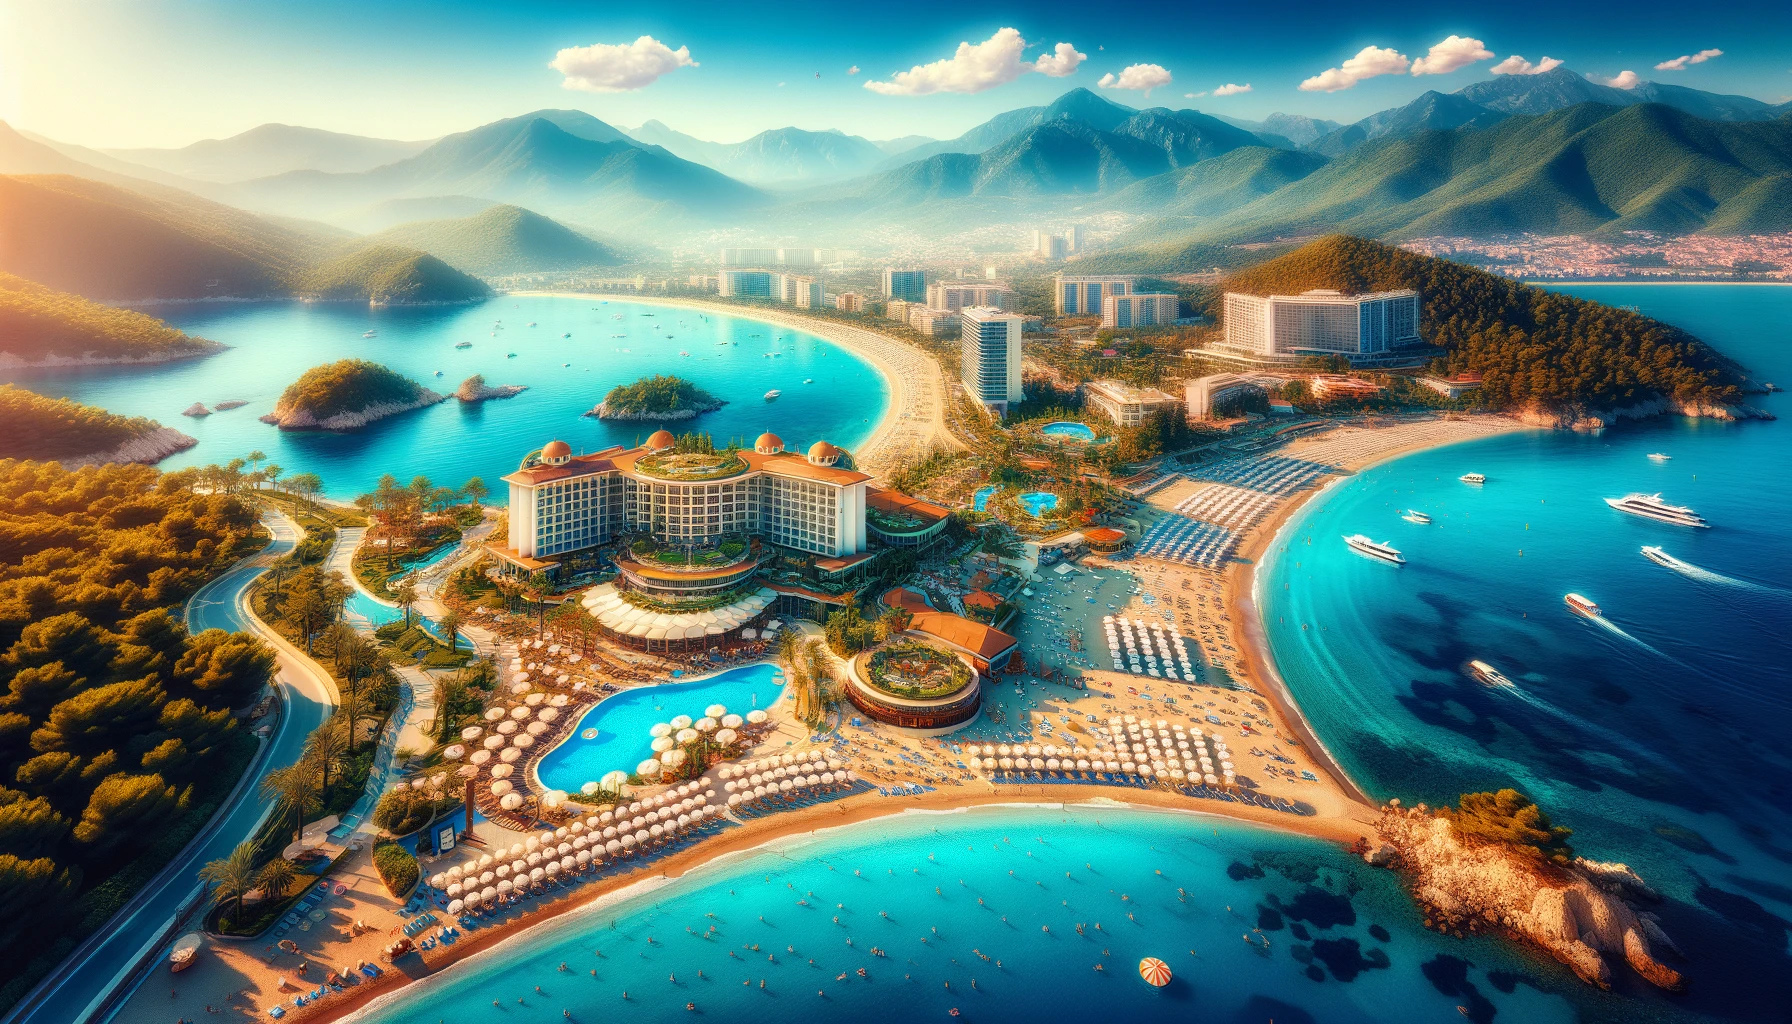 Here is a panoramic view illustrating the breathtaking beauty of a beach resort in Turkey, capturing the essence of an ideal holiday destination for relaxation and adventure. This scene embodies the perfect setting for families and travelers looking for a serene and picturesque vacation.